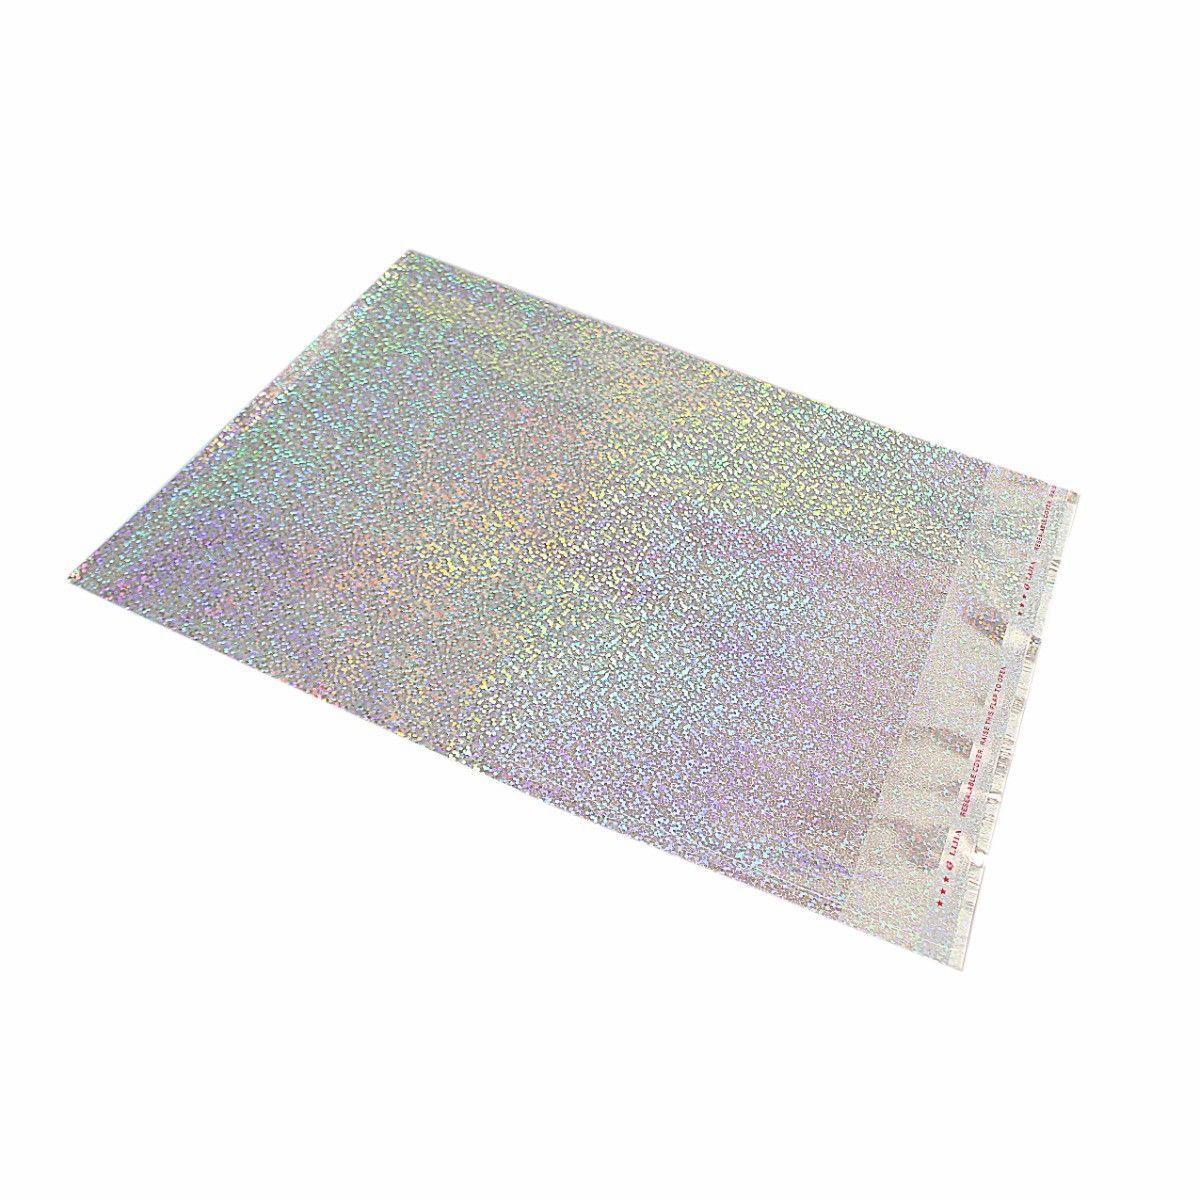 Shiny Packaging Wrapping Gift Bag Envelope 22cm x 26cm Pack Of 5 Assorted Colours 4913 (Large Letter Rate)